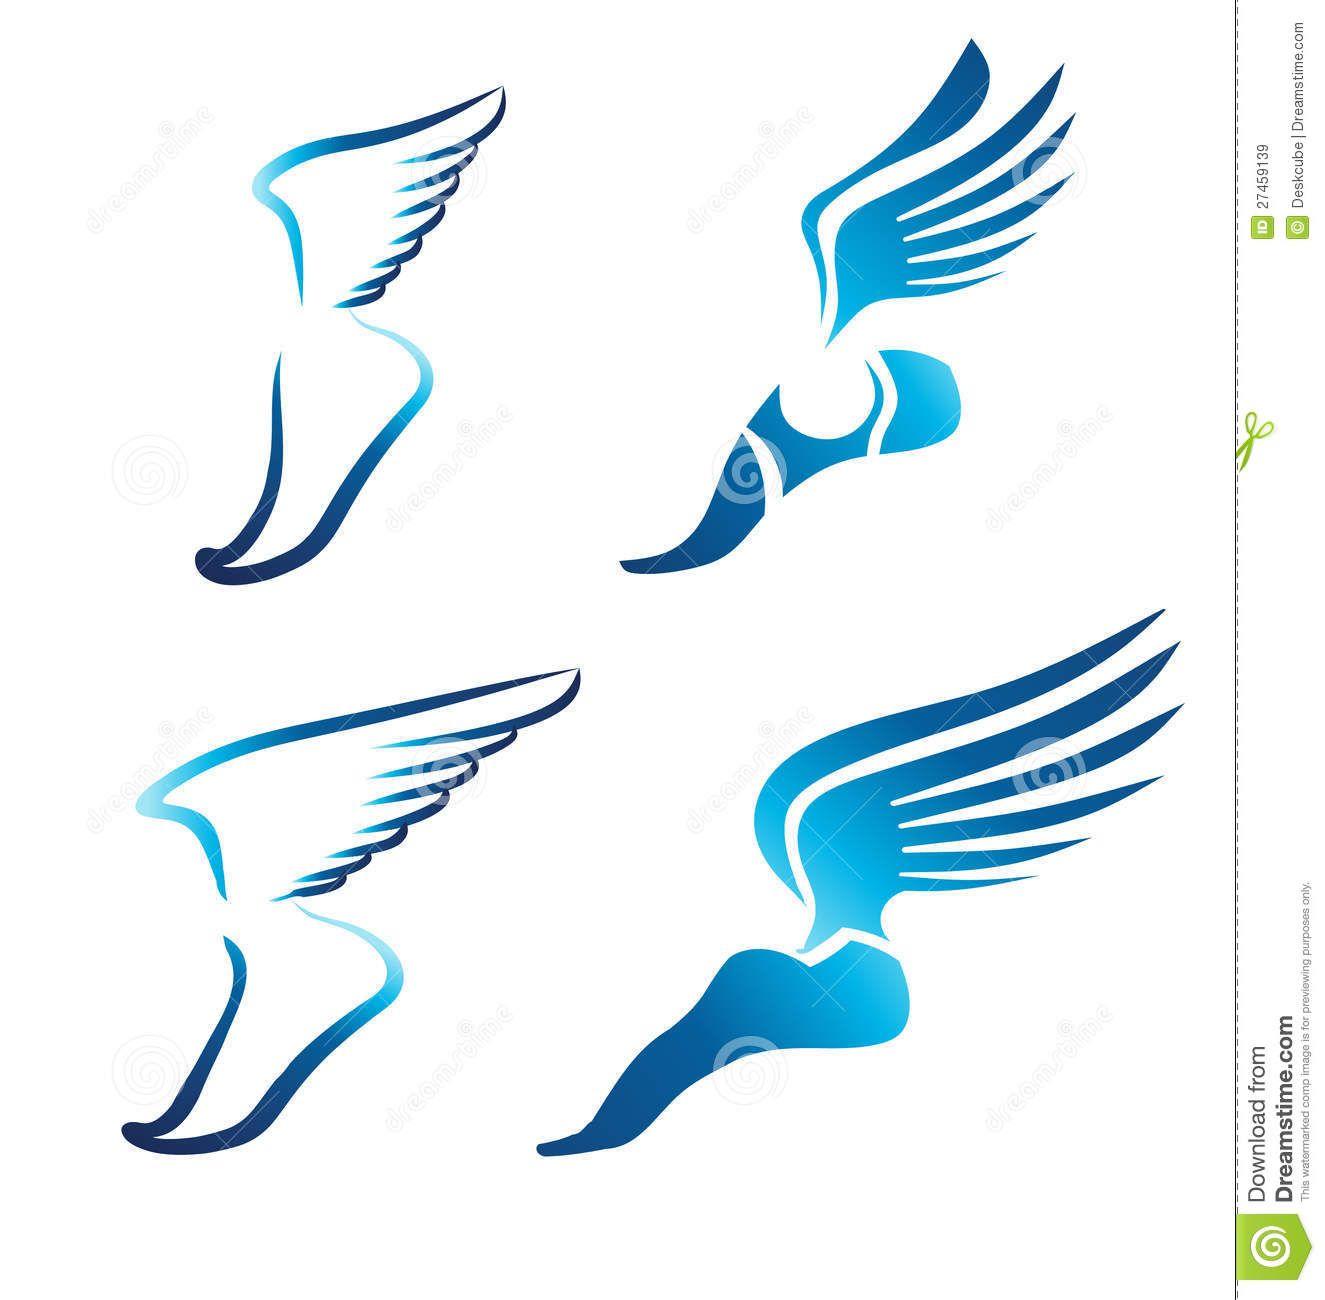 Who Has a Wing and a Foot Logo - Modern Swoosh Foot with Wing Logo Design | Abstract Graphics | Logo ...